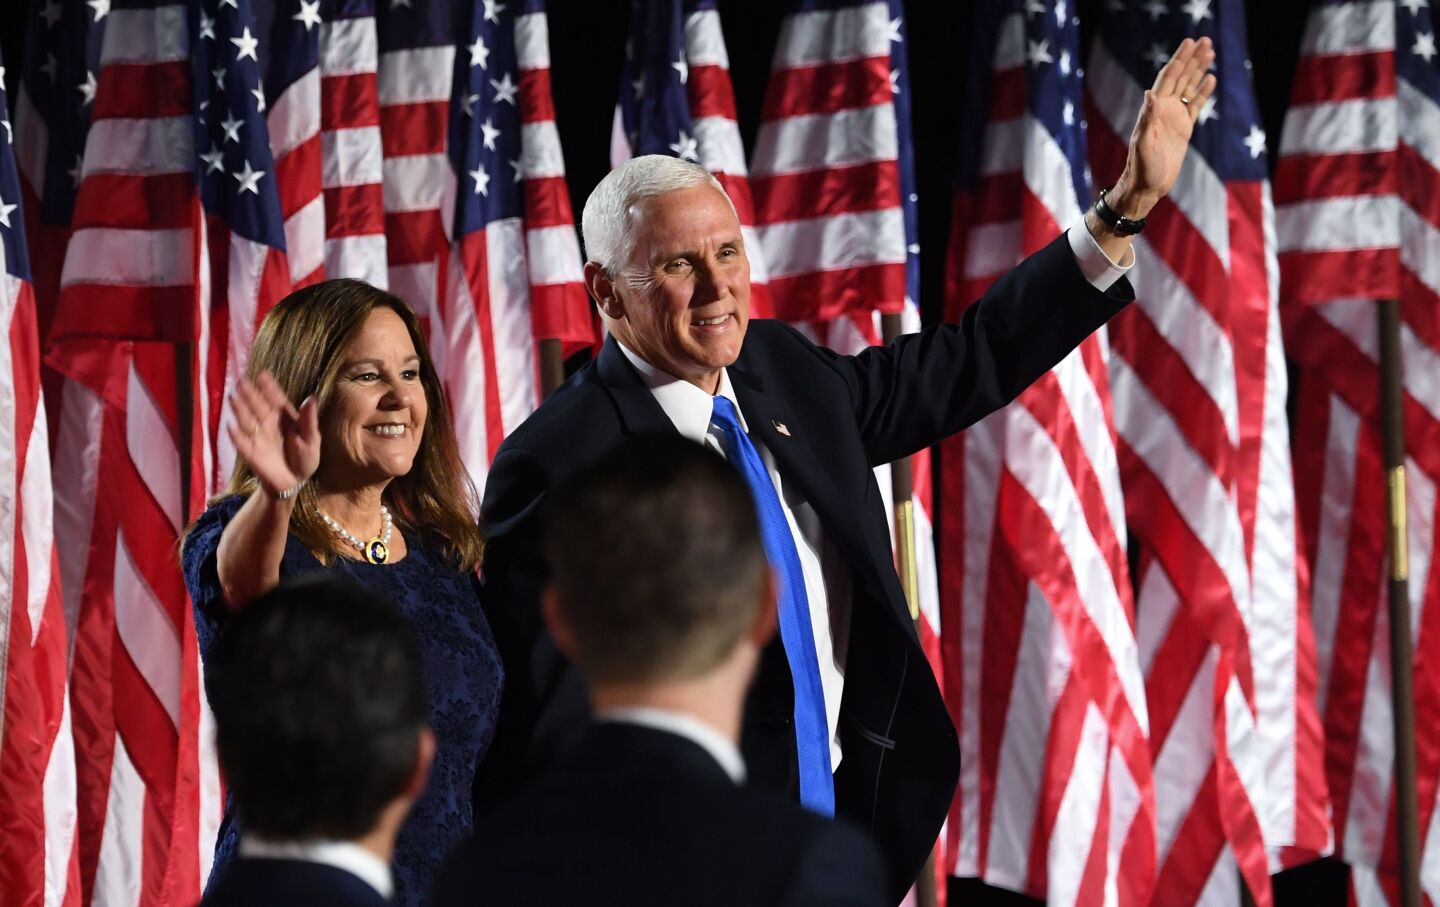 Vice President Mike Pence and Second Lady Karen Pence wave from the stage in front of a backdrop of U.S. flags